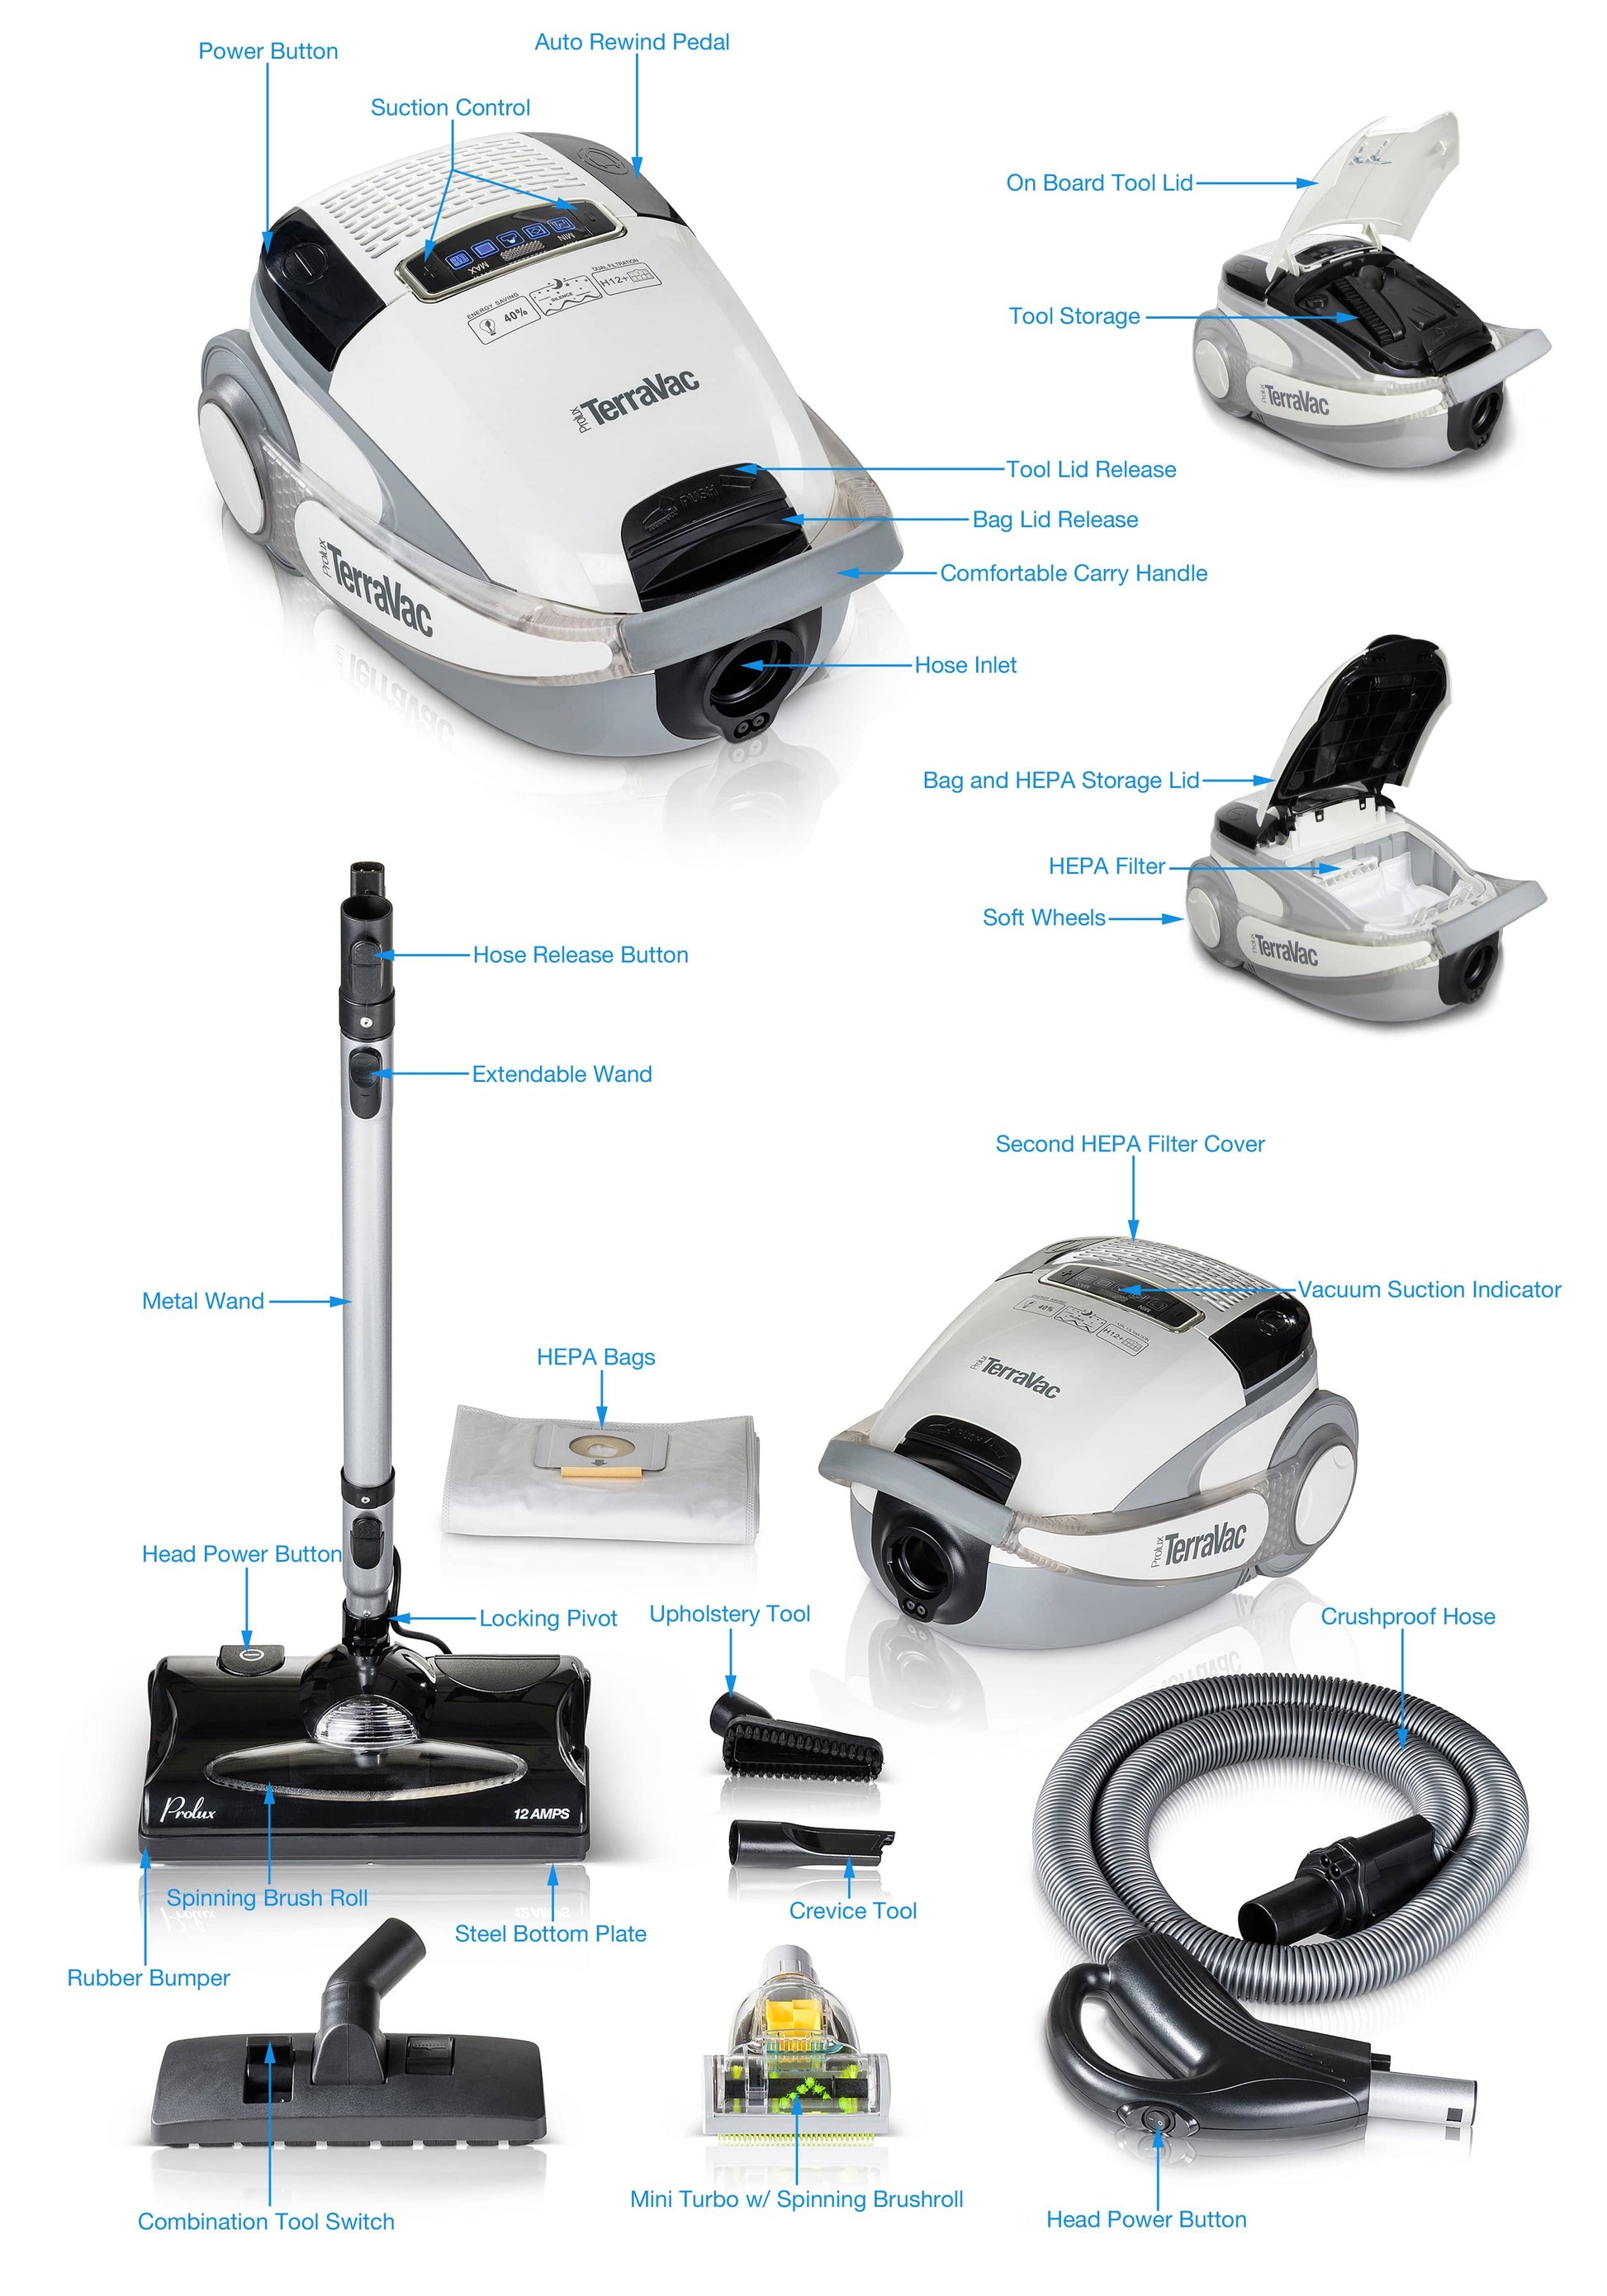 White 5 Speed Prolux TerraVac Vacuum Cleaner with Sealed HEPA Filter